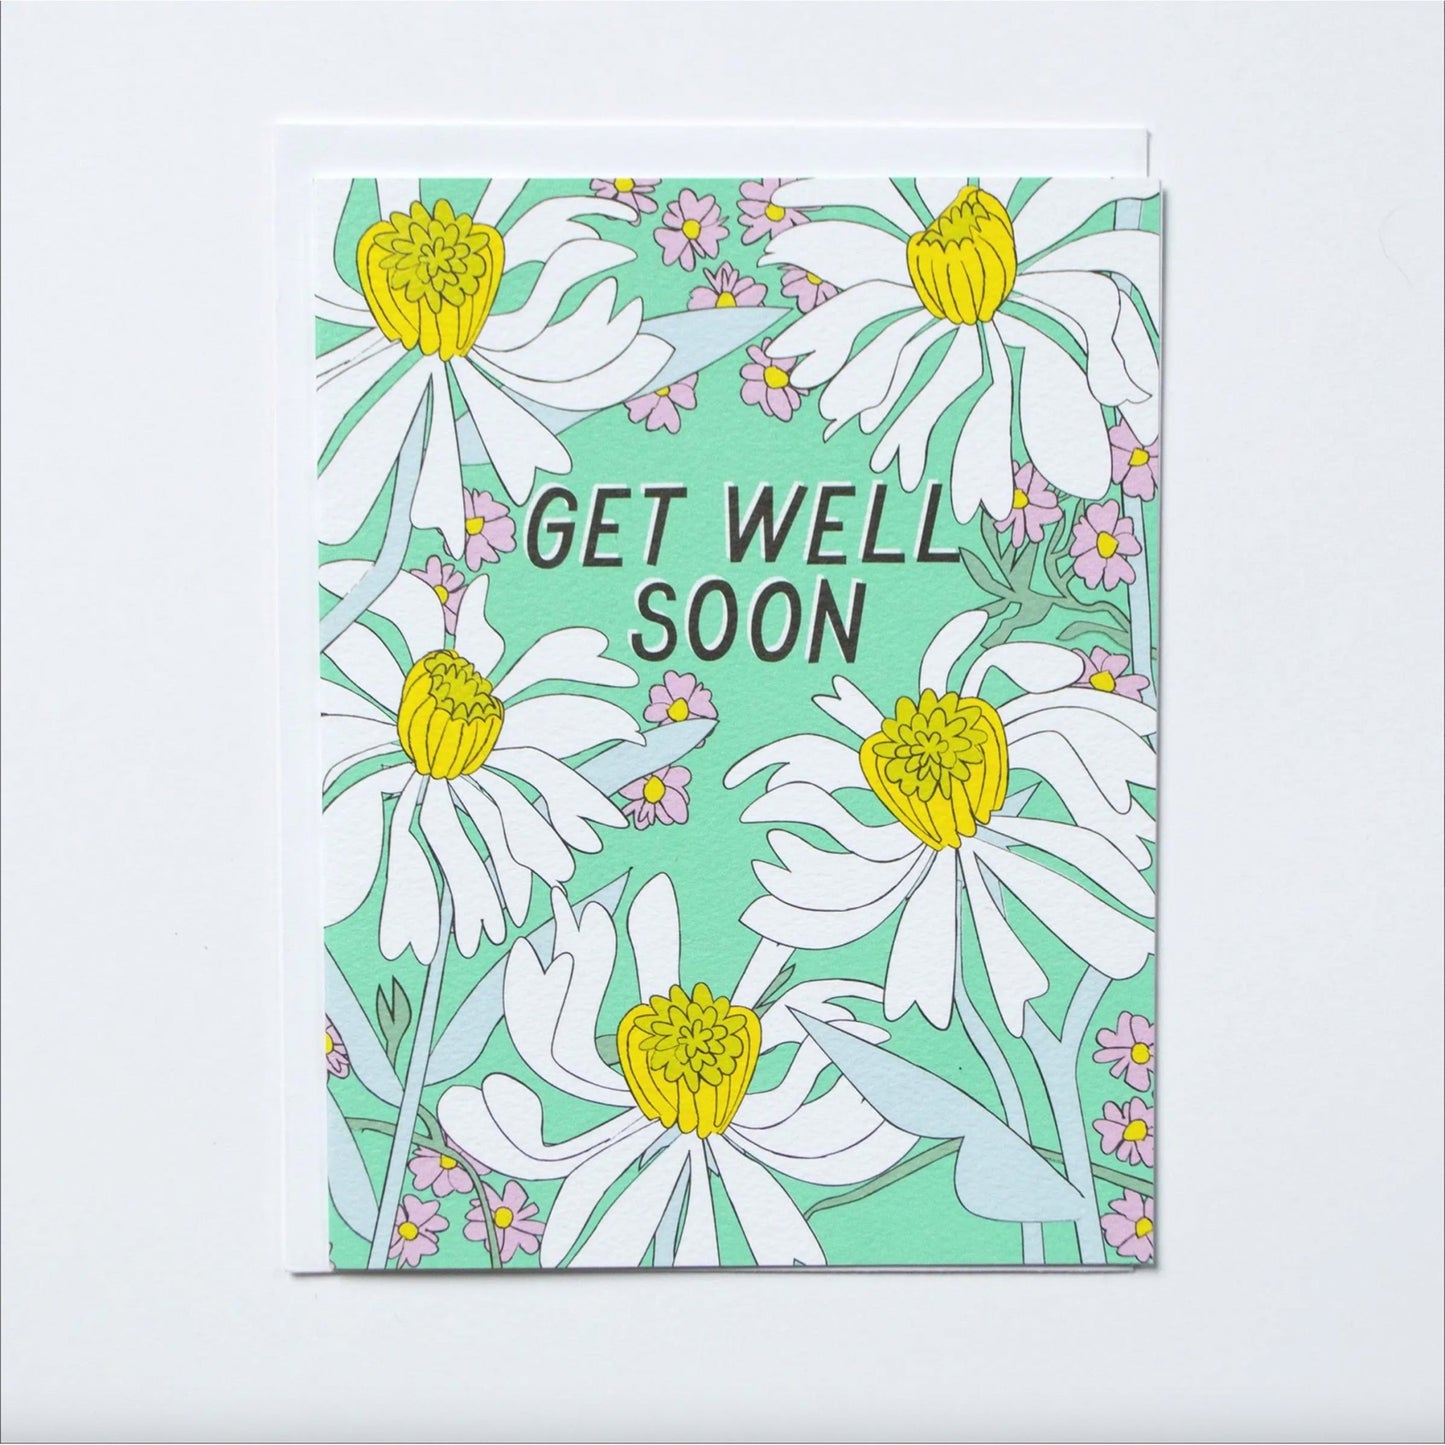 Get Well Soon Daisies Note Card | BANQUET WORKSHOP - Muse + Moonstone